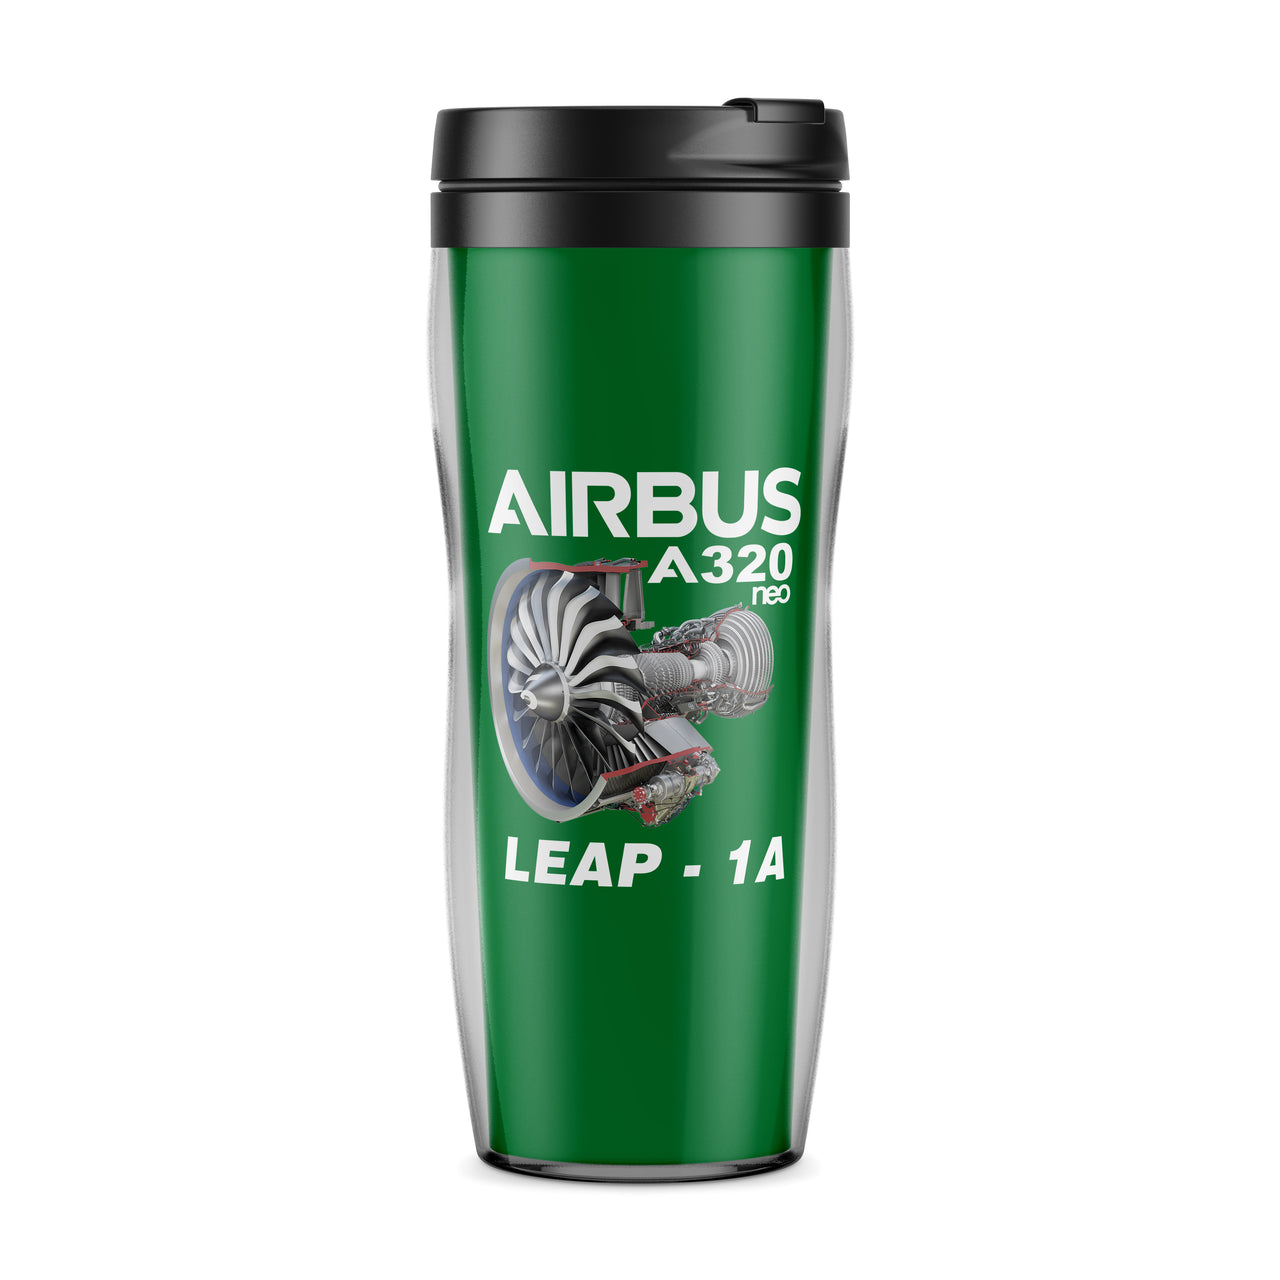 Airbus A320neo & Leap 1A Designed Travel Mugs